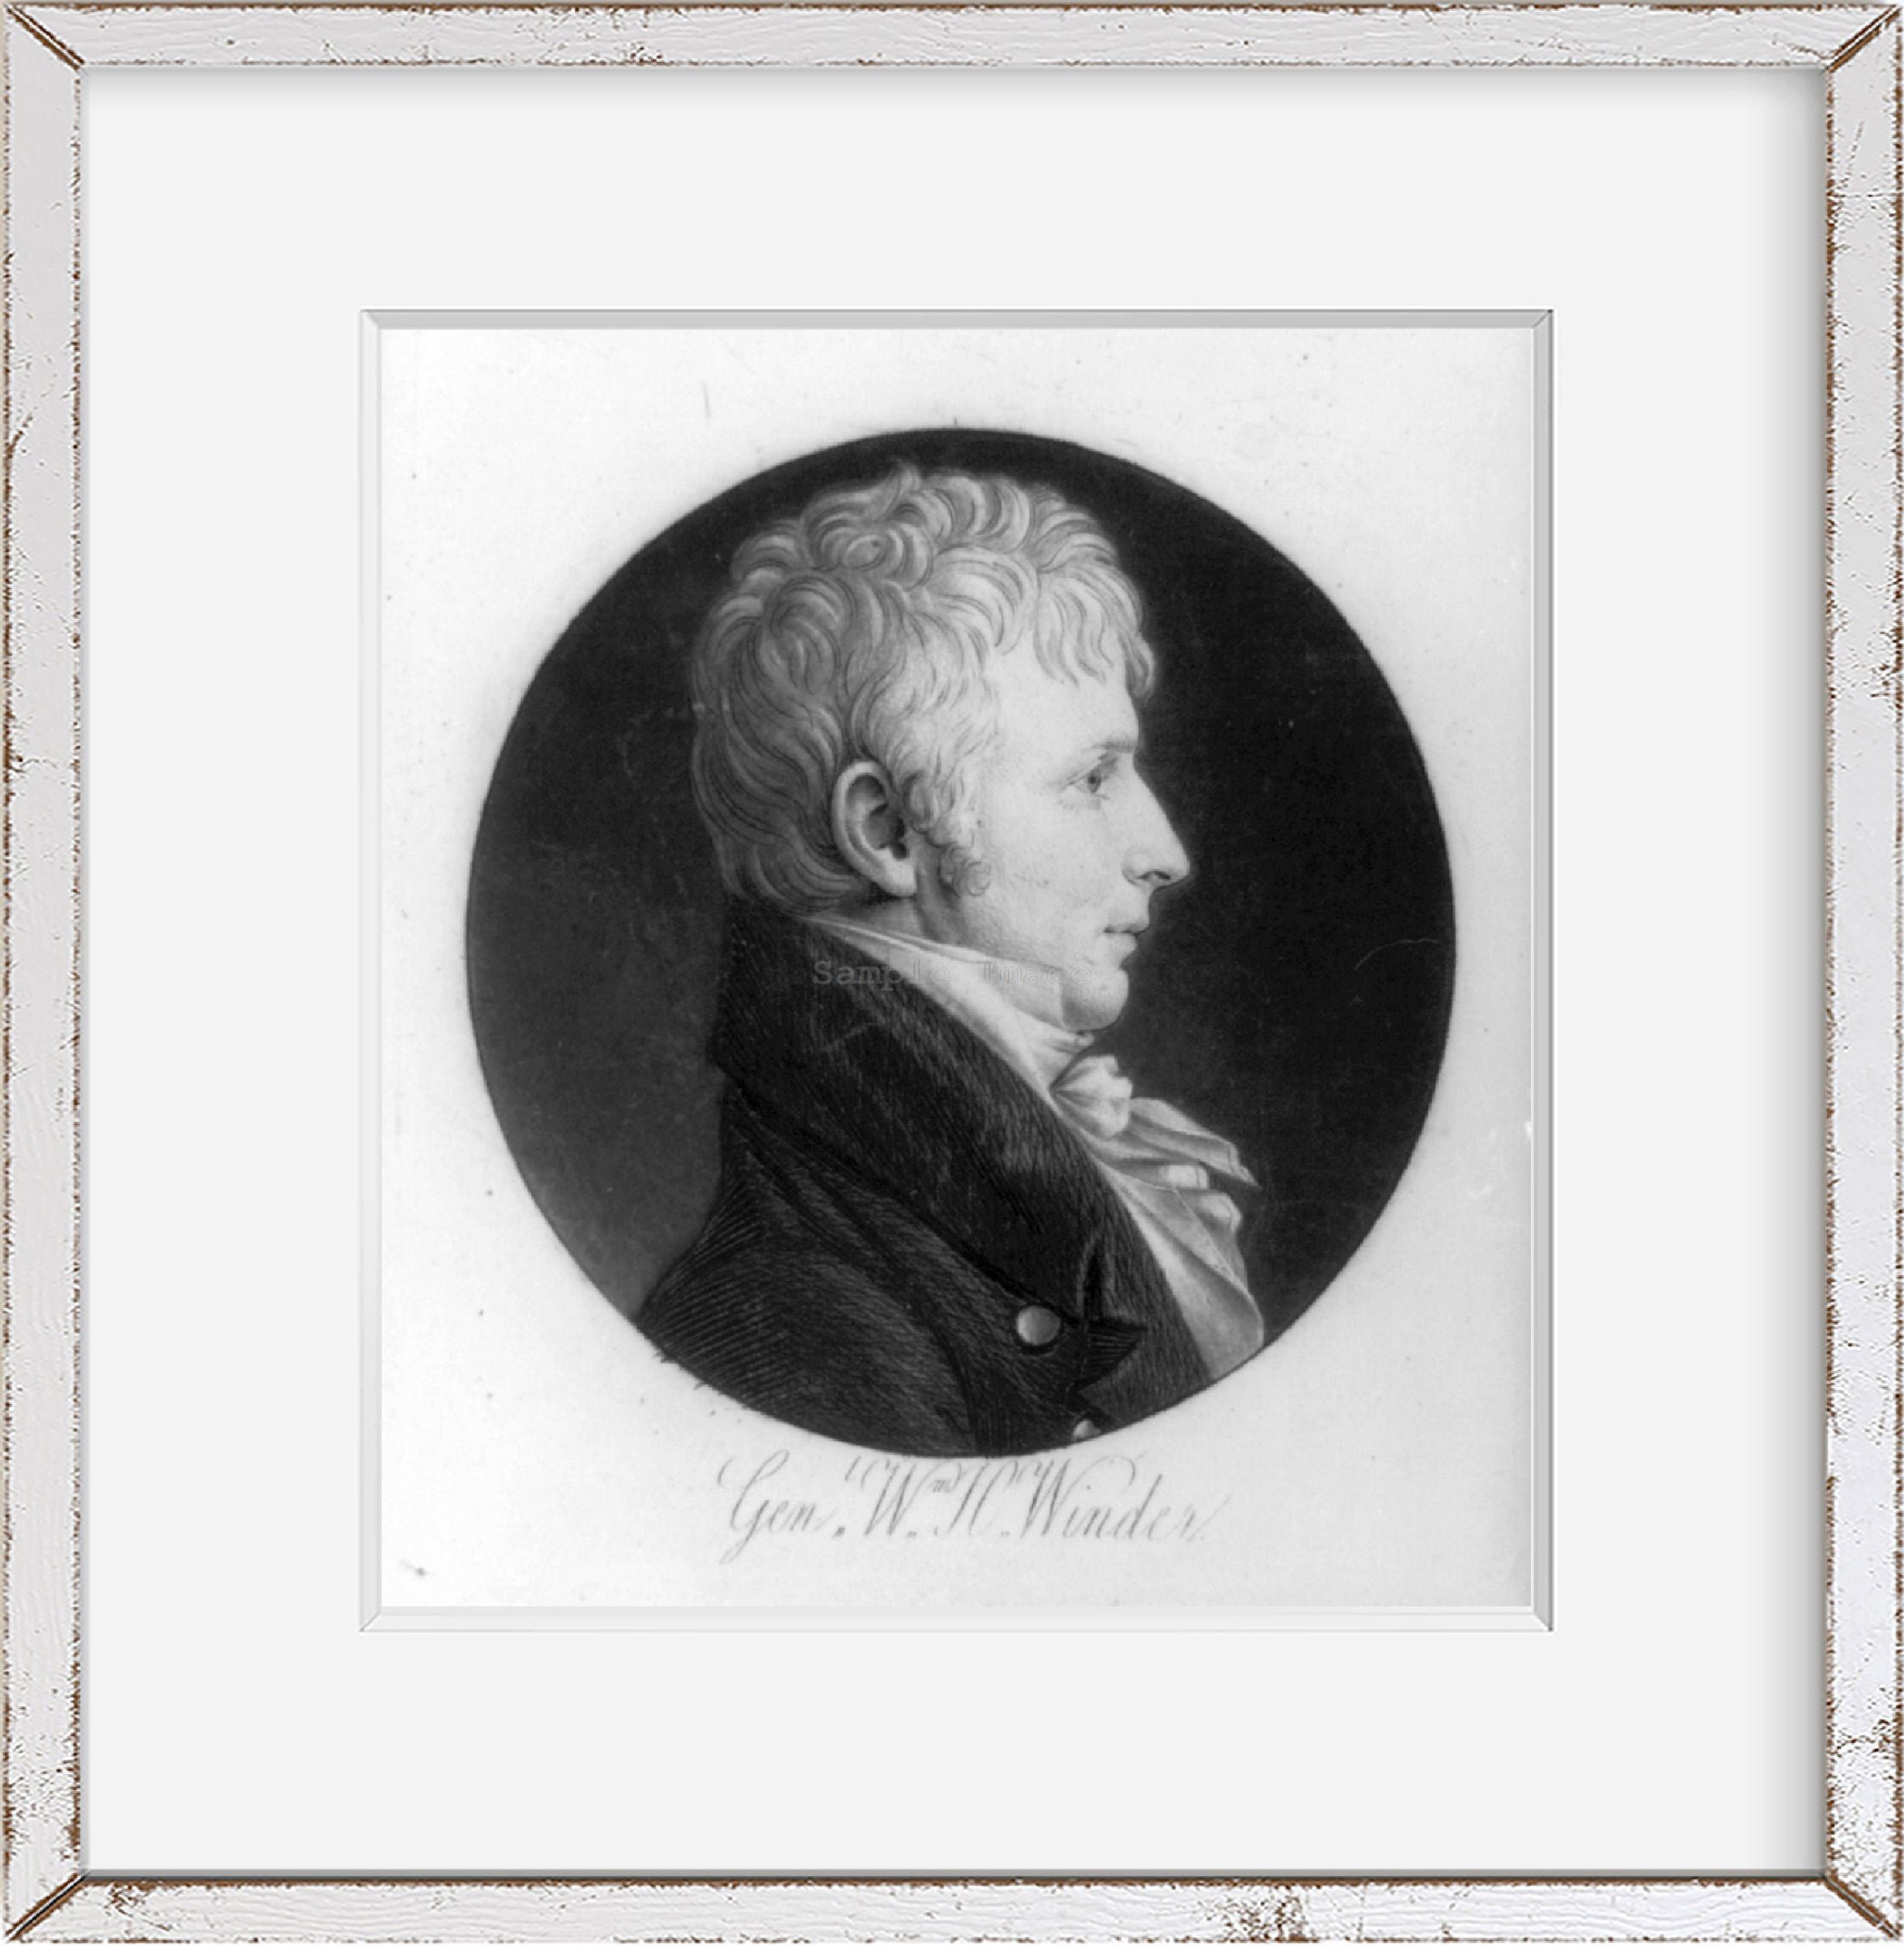 Photo: William Henry Winder, 1775-1824, American Soldier, Maryland Lawyer, General